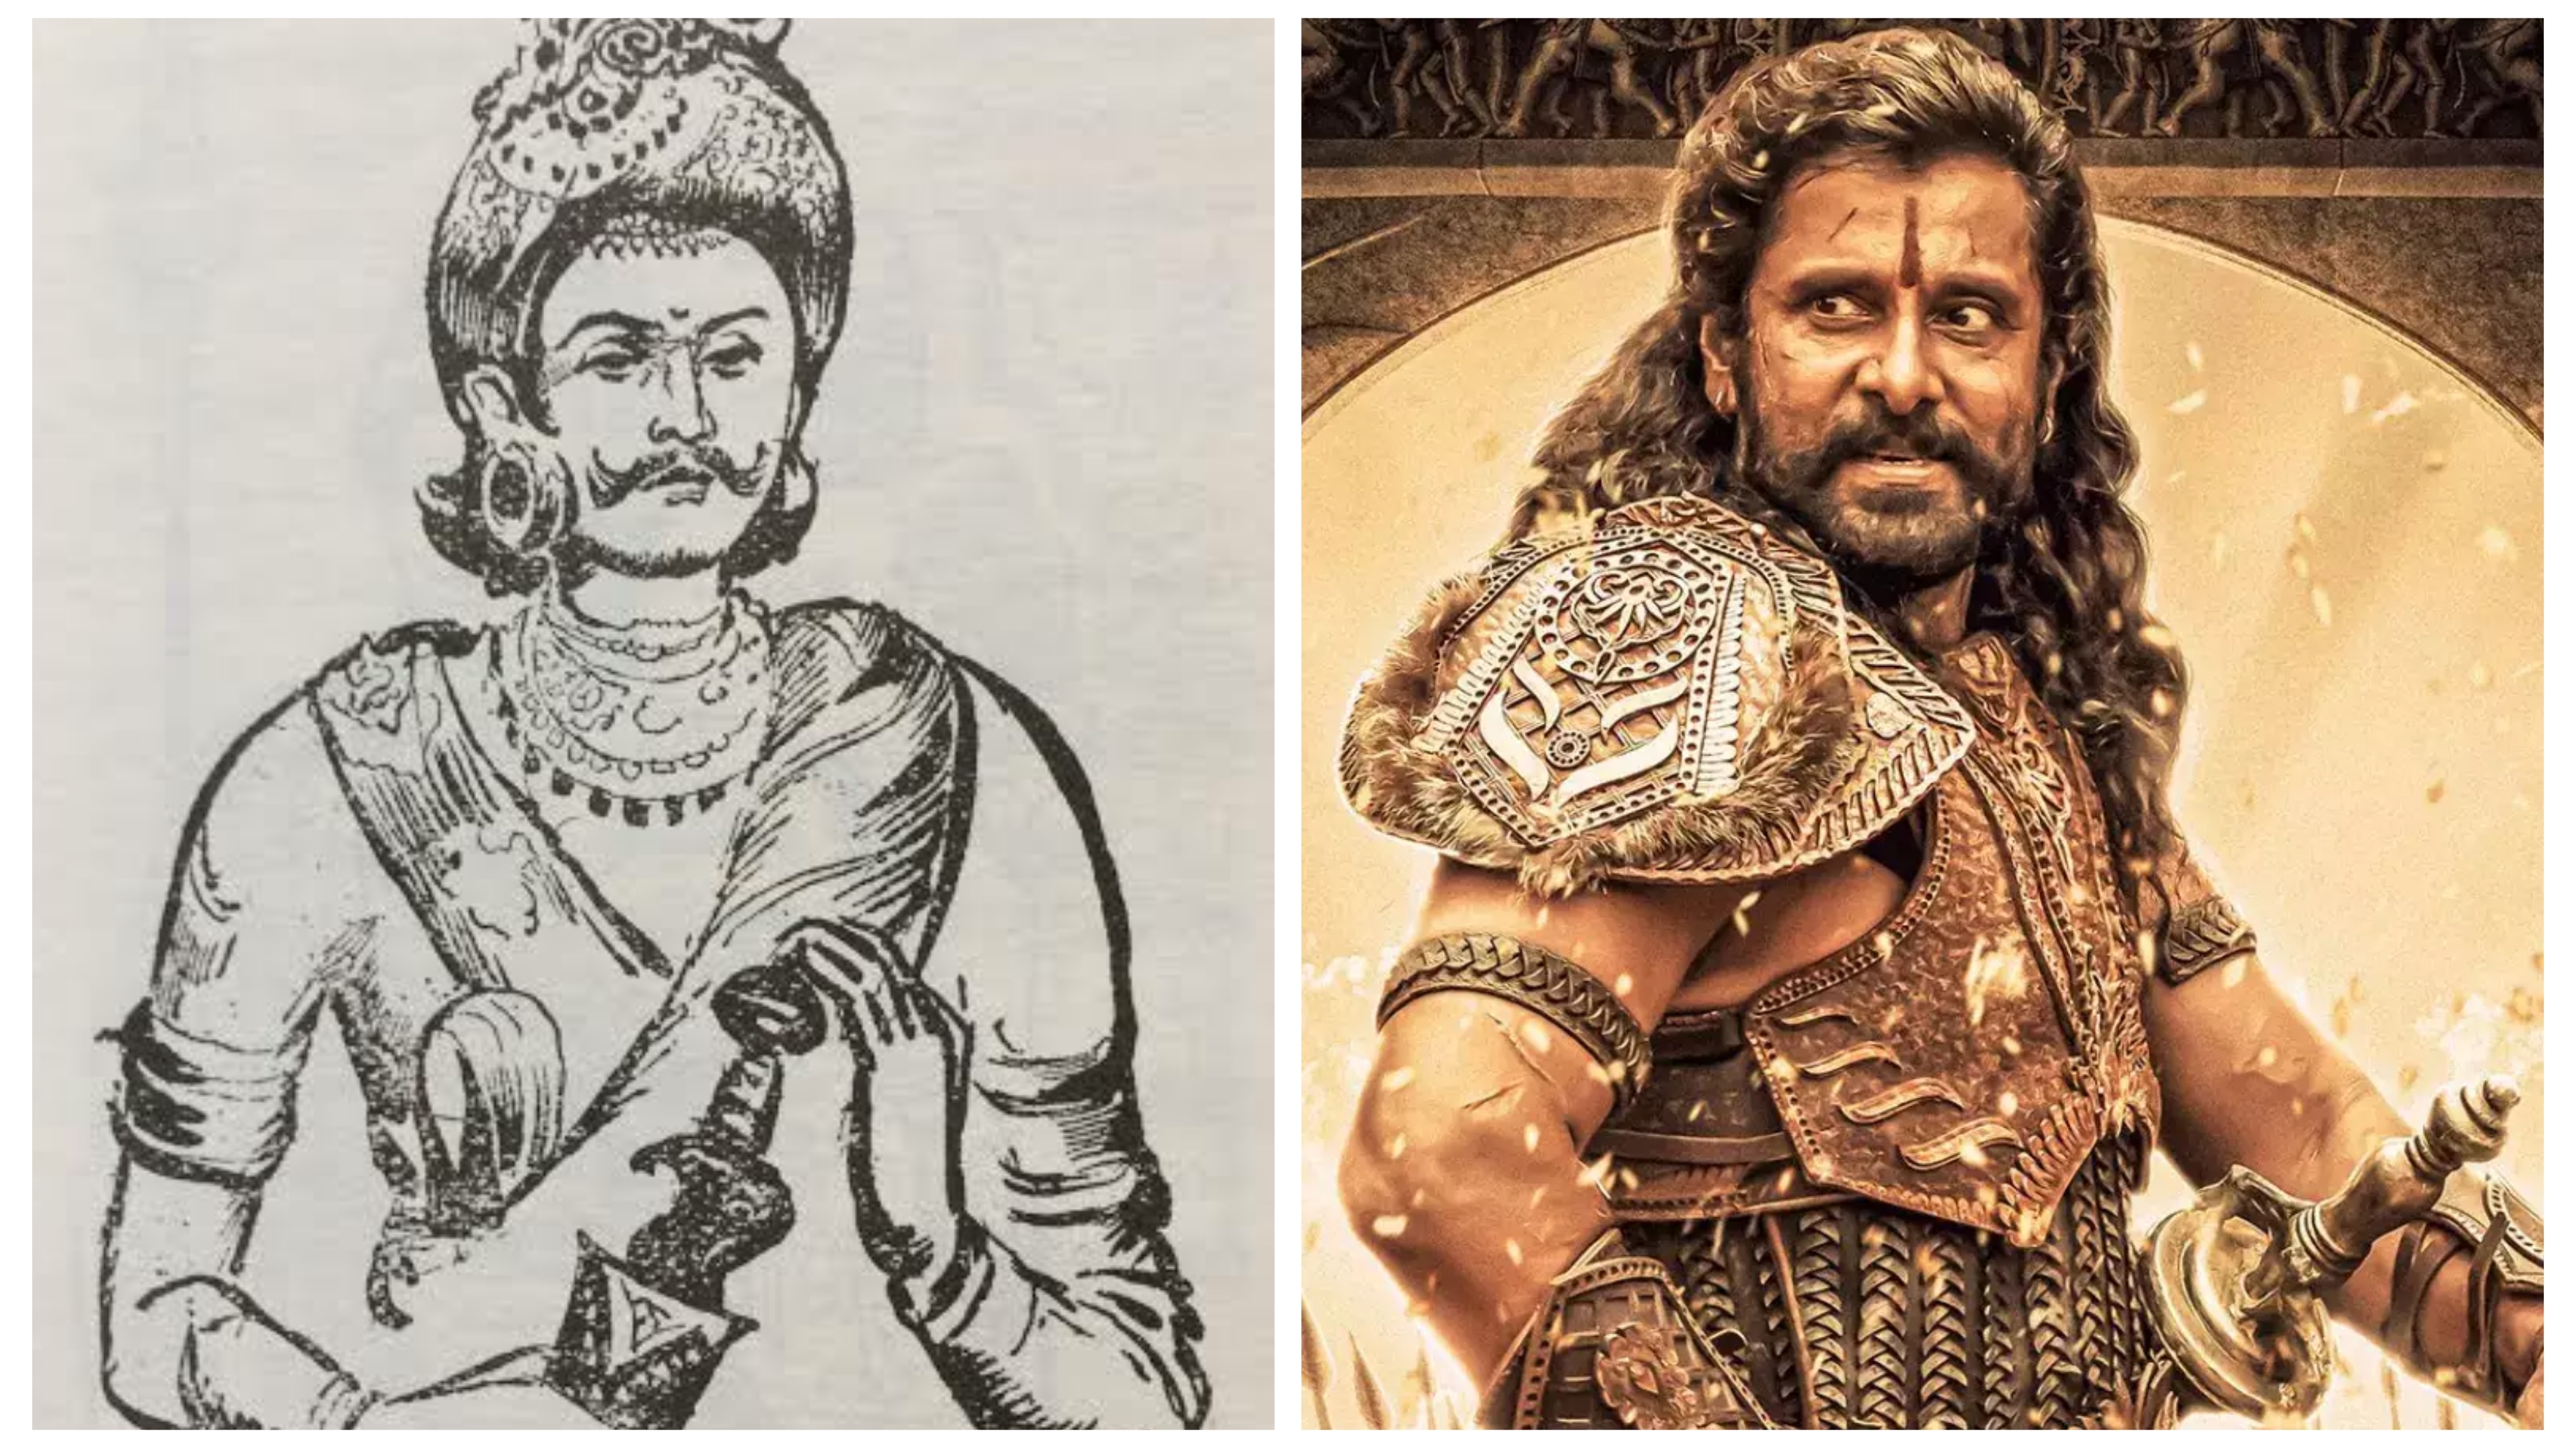 Even the hilt of the sword wielded by Vikram's character has been recreated in the film.